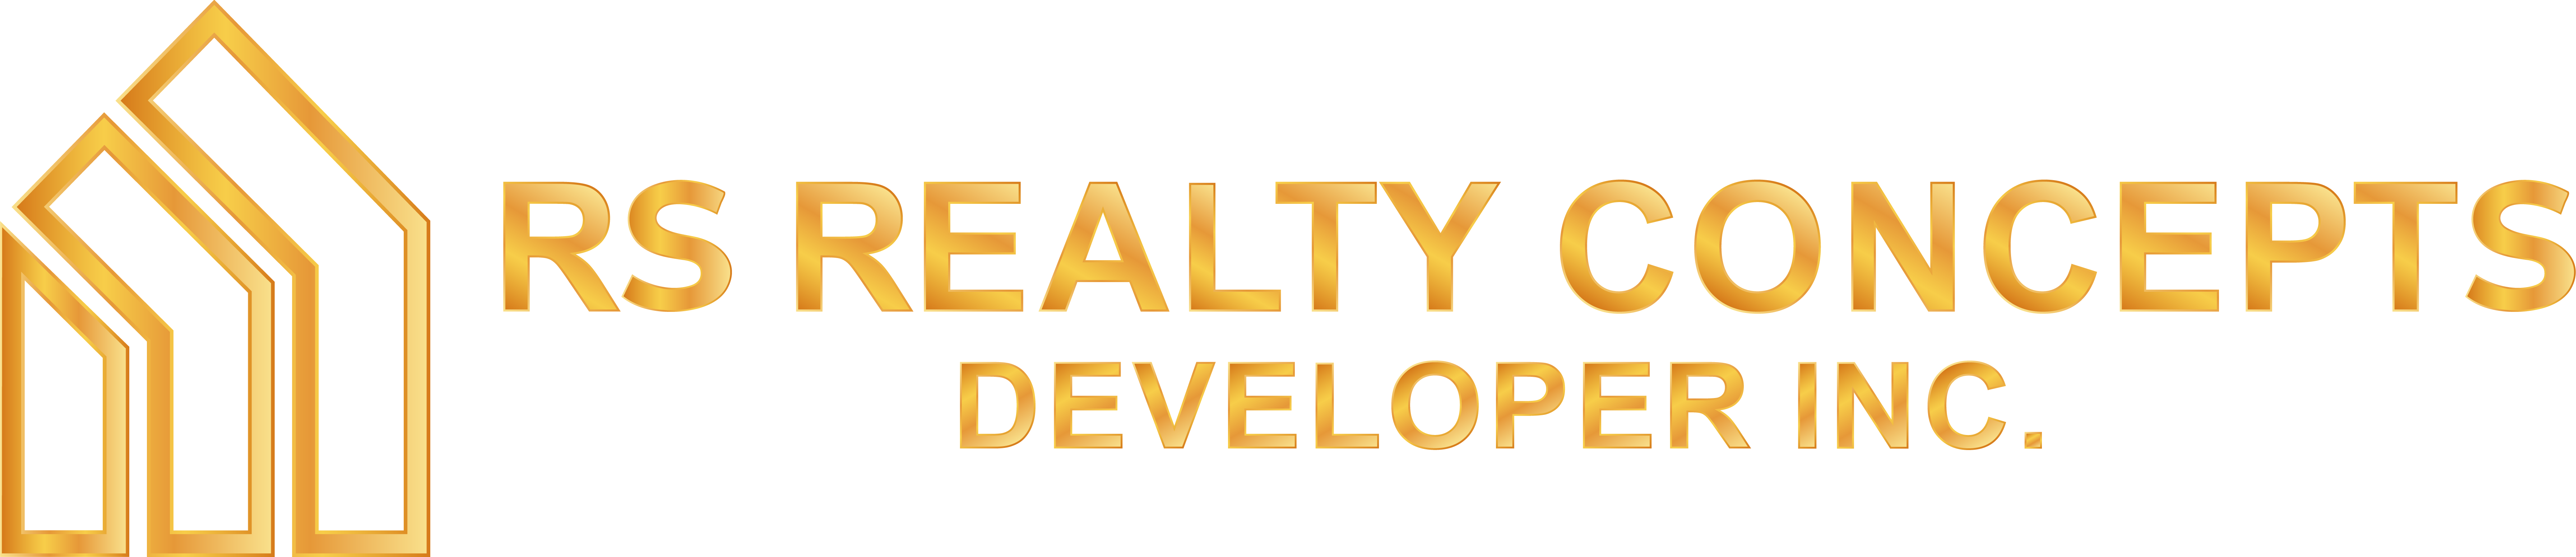 RS Realty Concepts Developer Inc